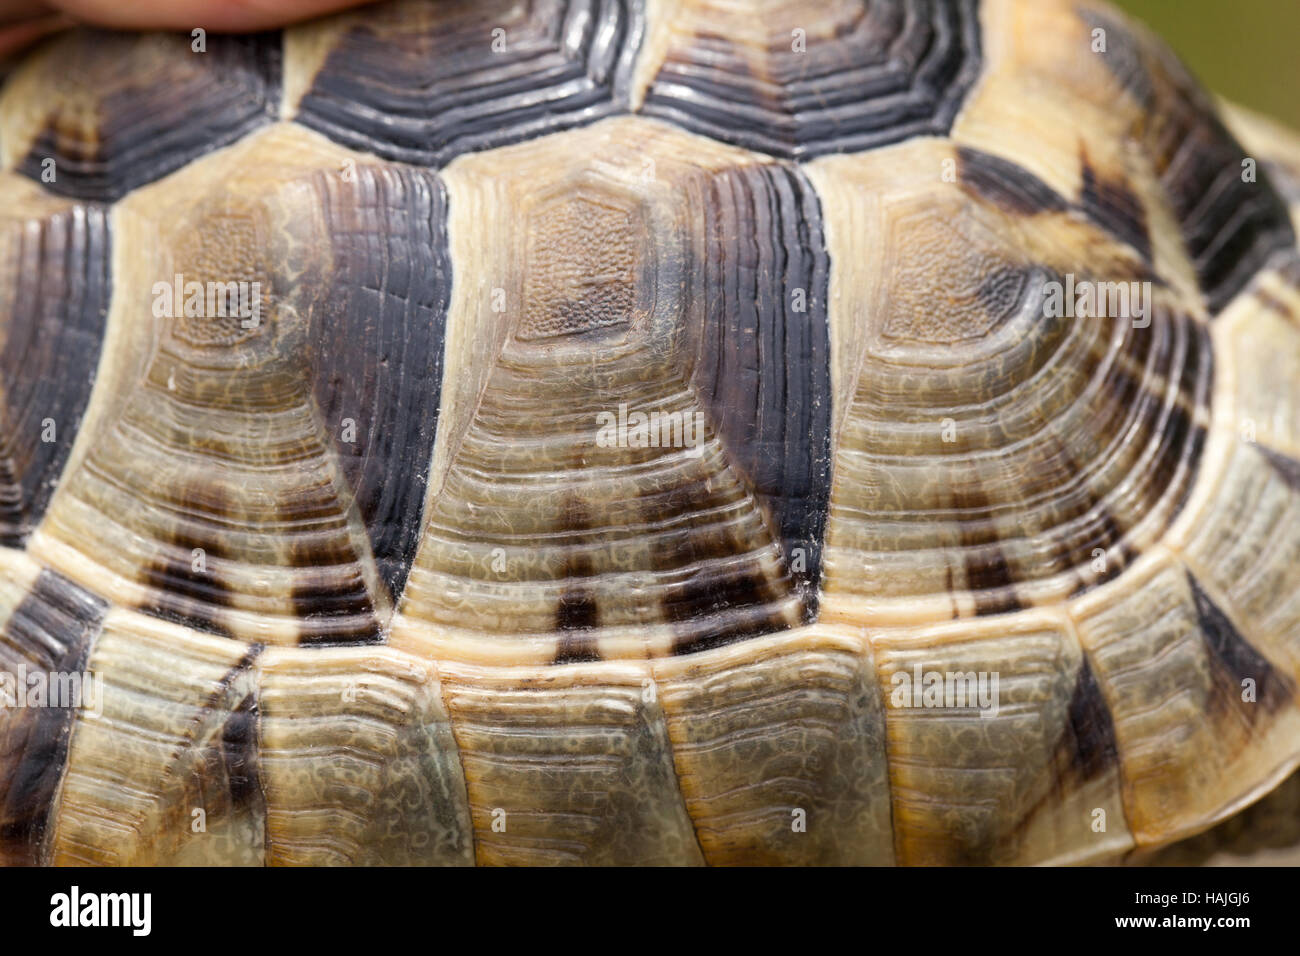 Mediterranean Spur-thighed Tortoise (Testudo graeca ibera). Carapace, or upper shell, scutes showing periods of growth rings. Head end right. Stock Photo